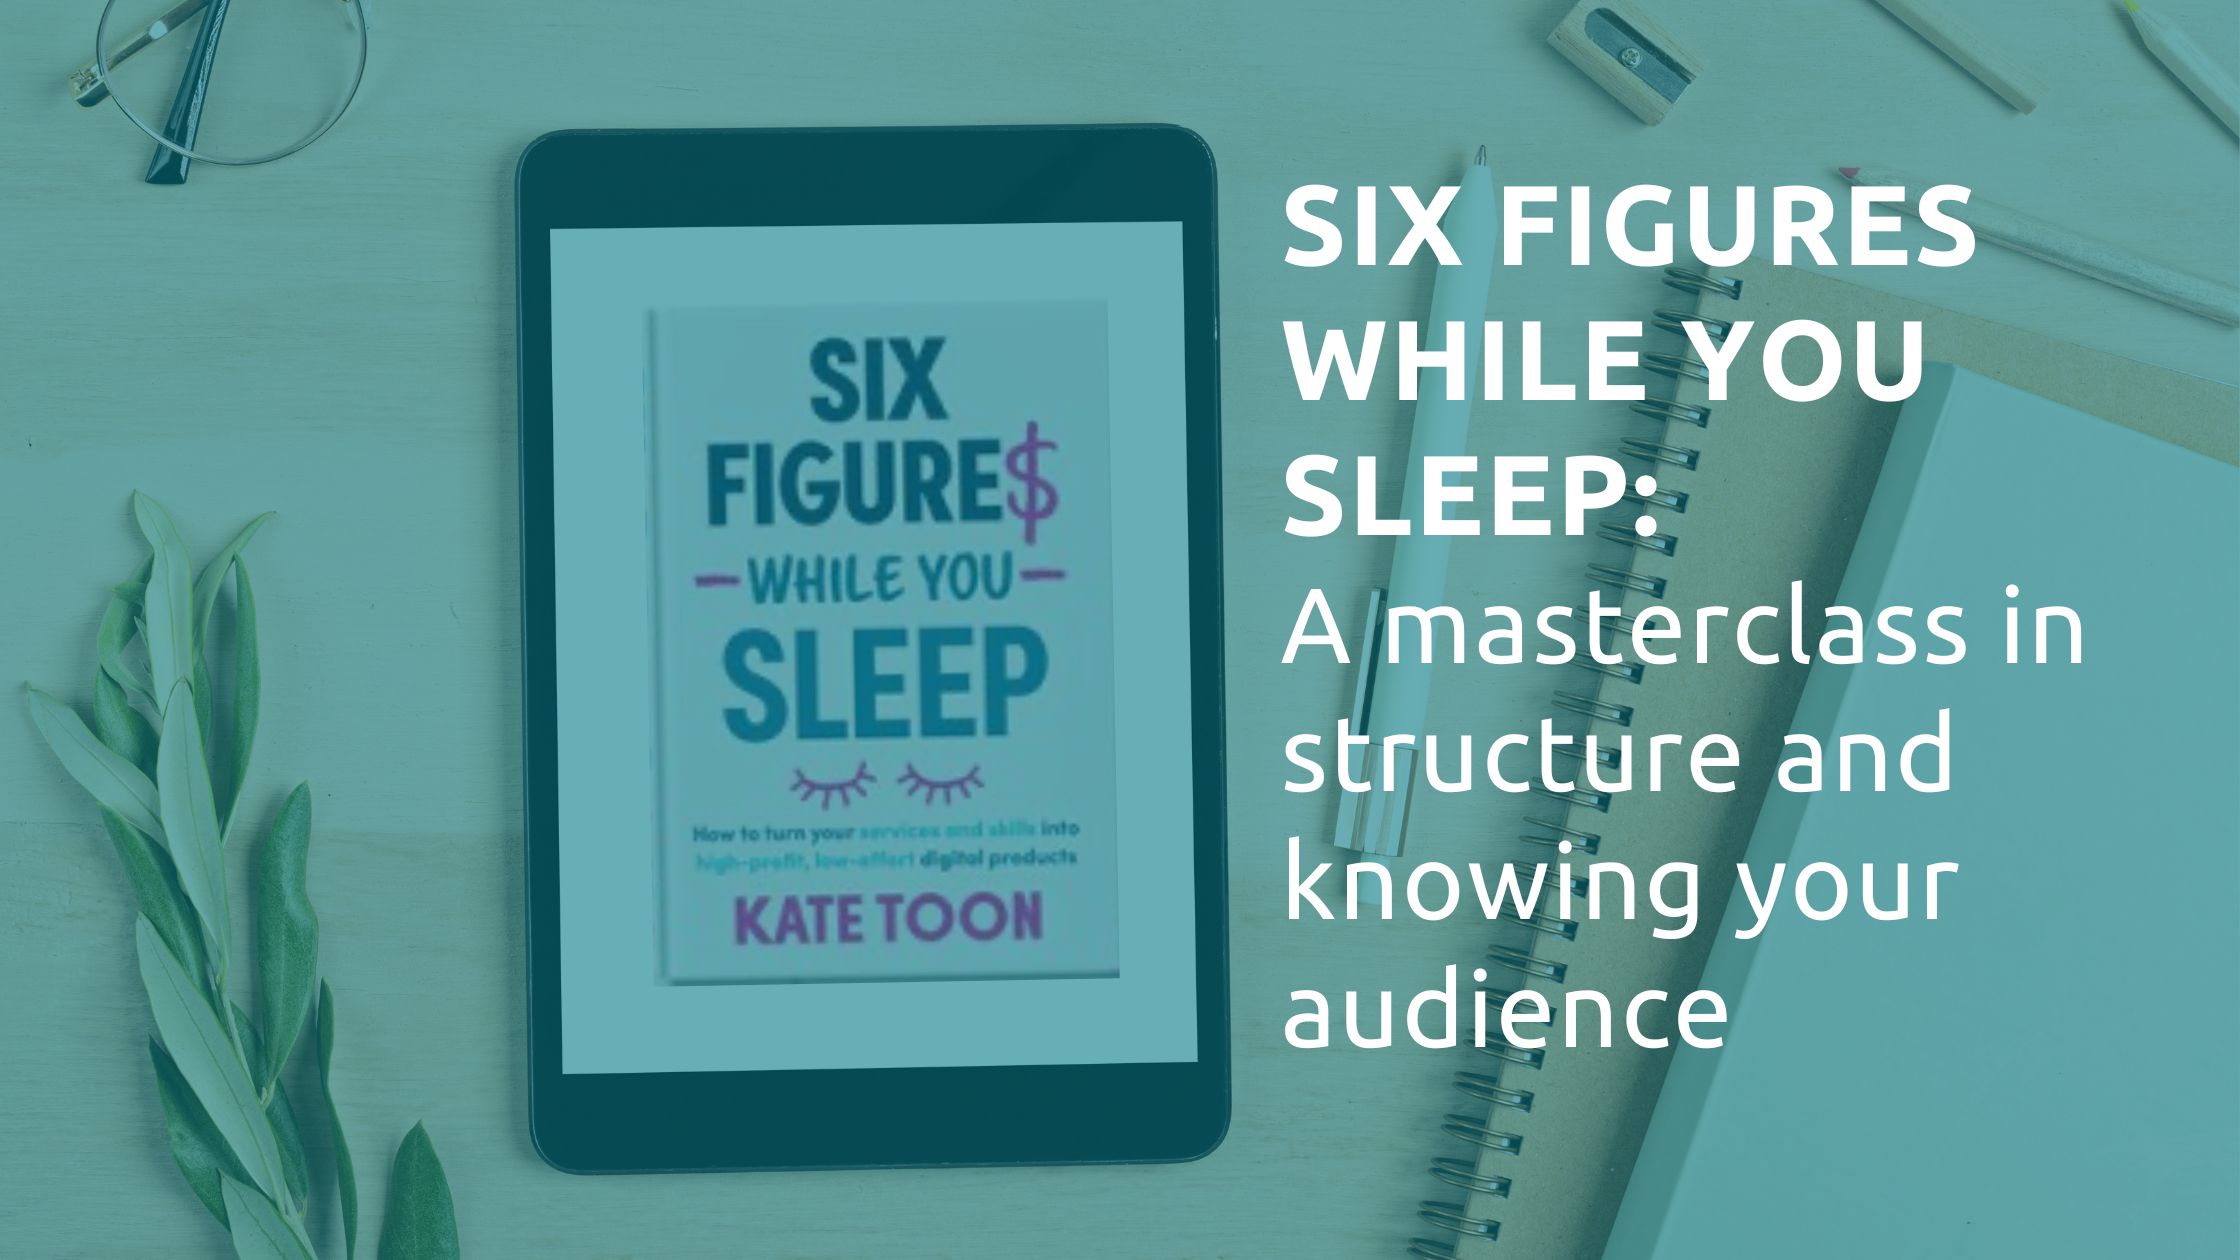 An image showing the front cover of Six Figures While You Sleep on a tablet. The tablet is next some pens and notepads on a desk